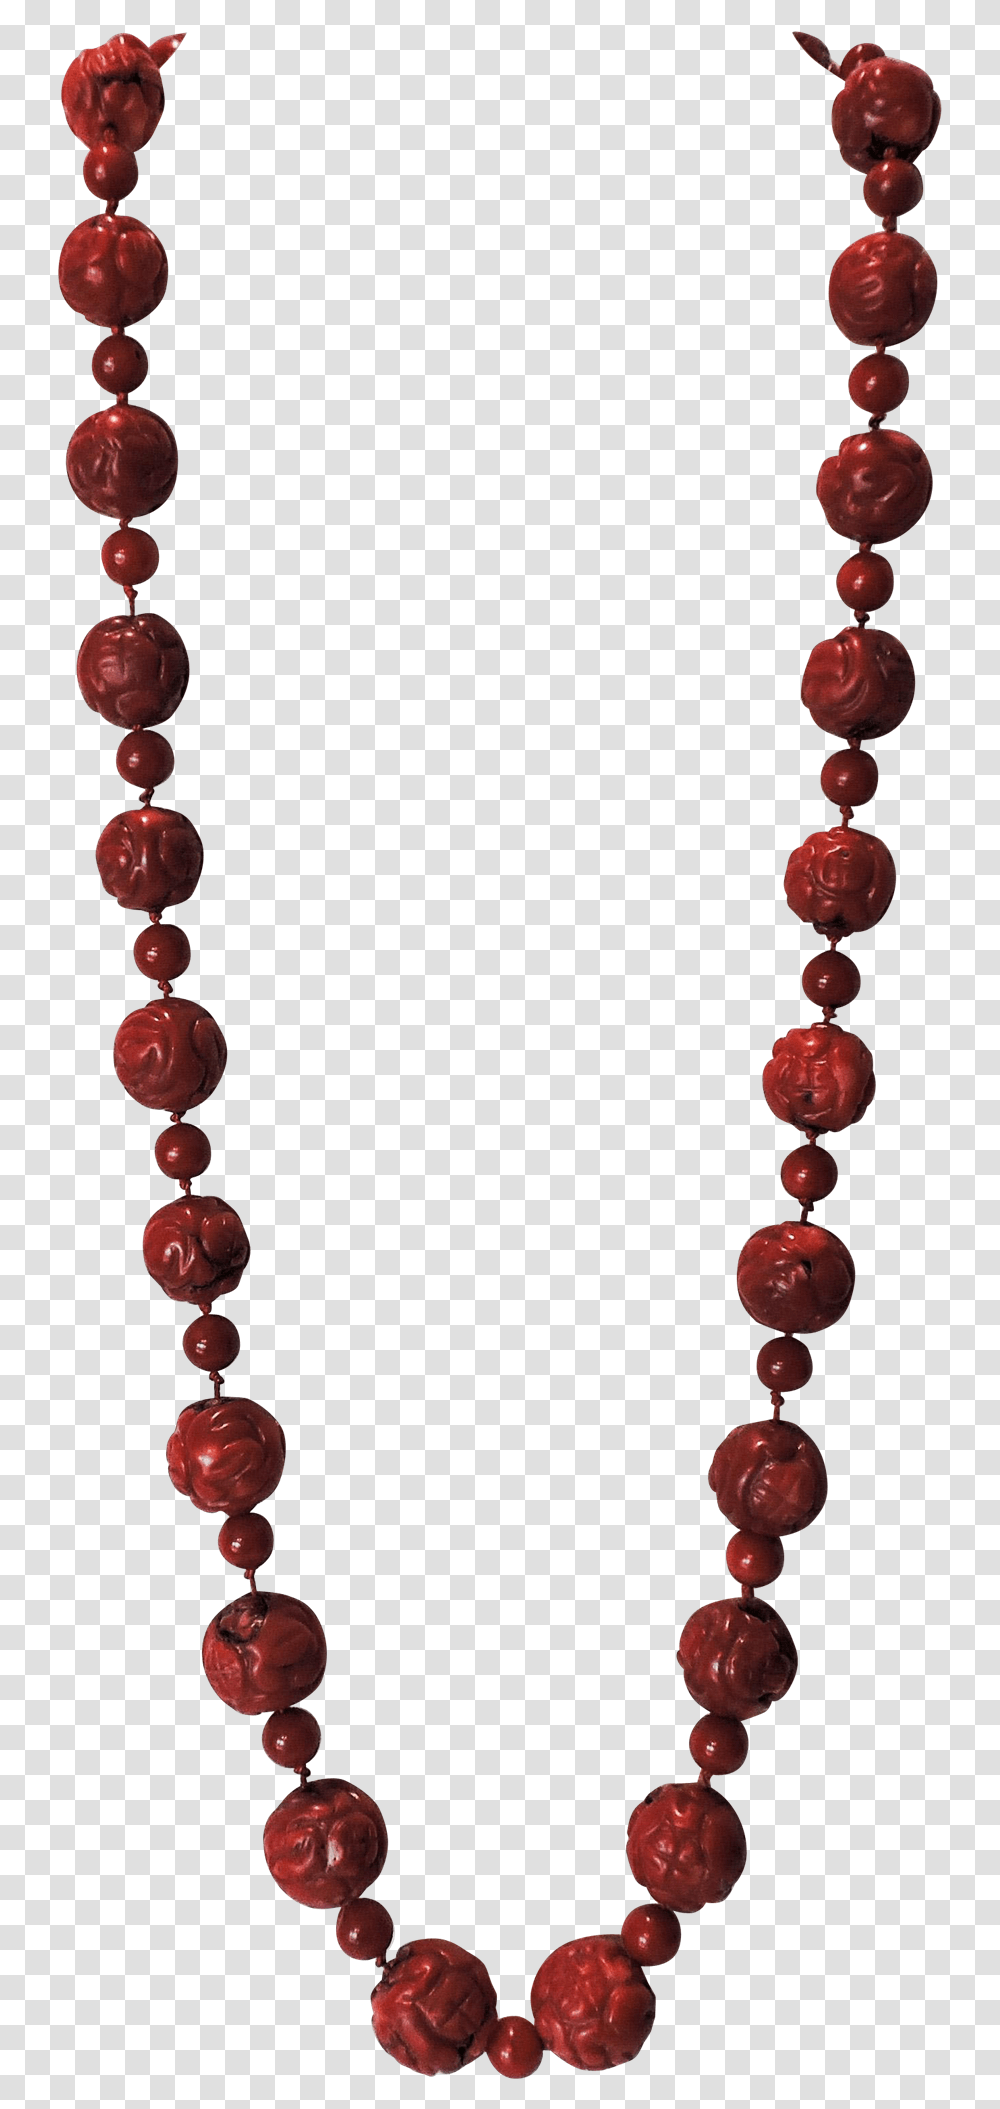 Bead Necklace Picsart Full Hd, Accessories, Accessory, Jewelry, Ornament Transparent Png